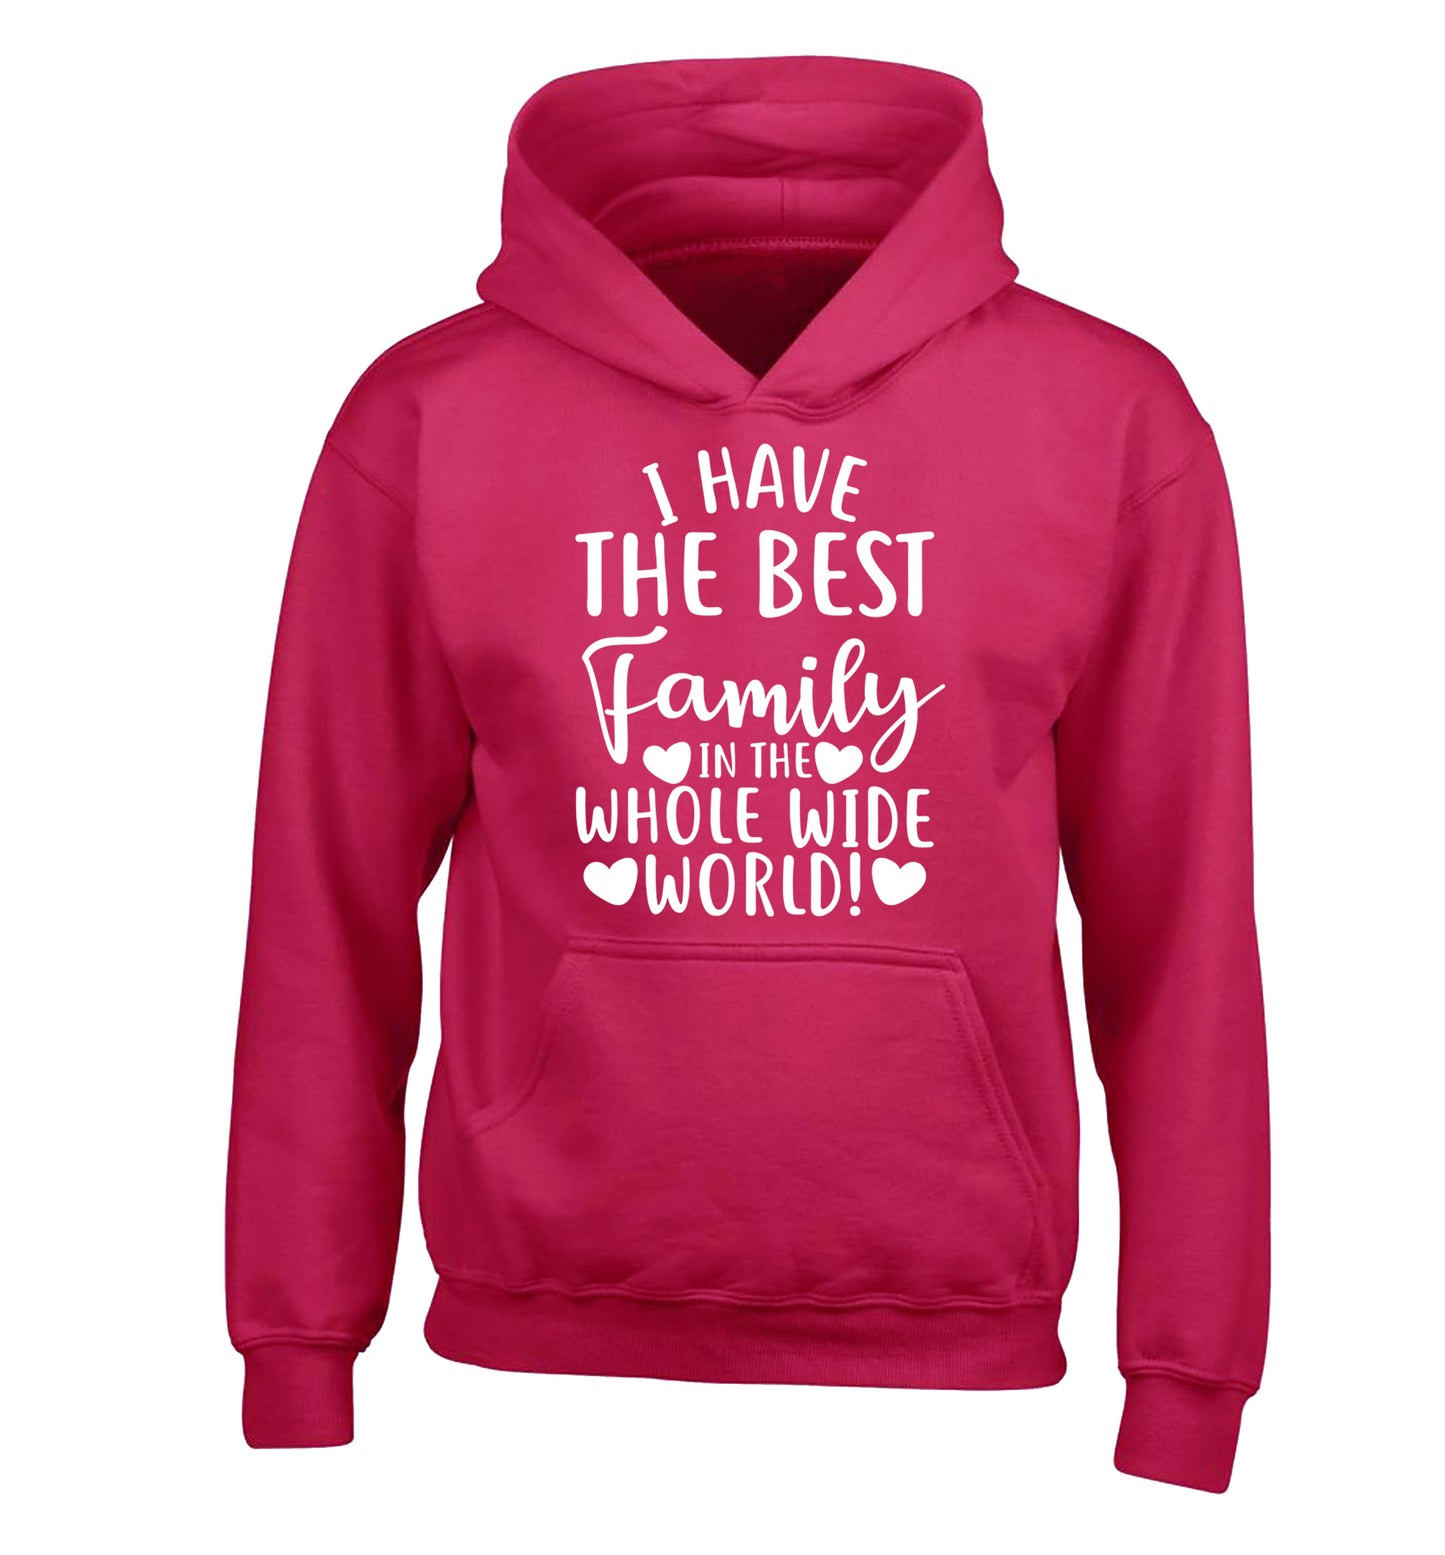 I have the best family in the whole wide world! children's pink hoodie 12-13 Years